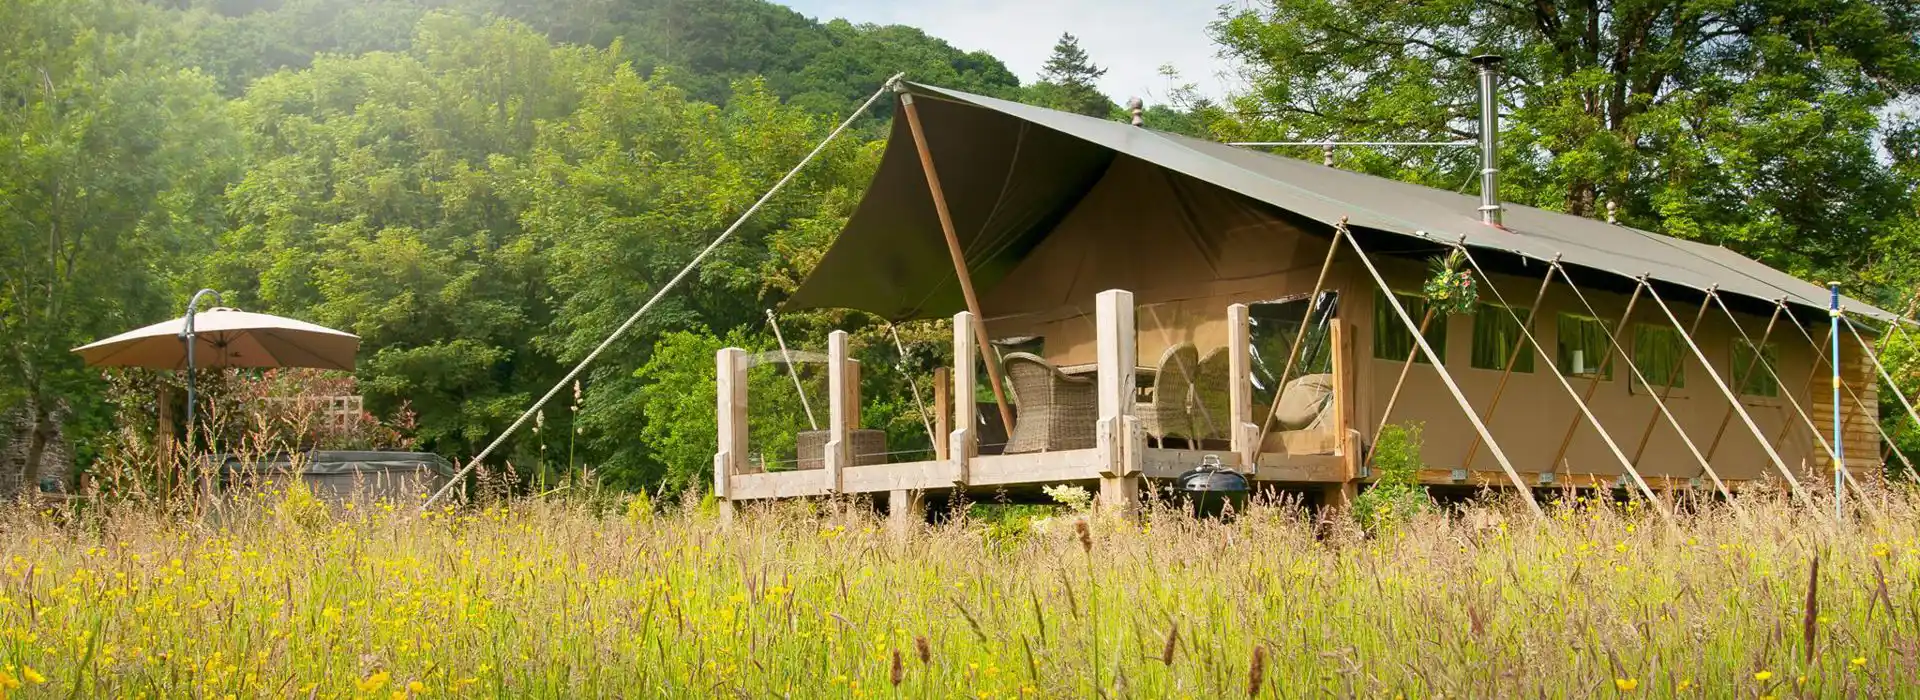 Glamping holidays in the UK